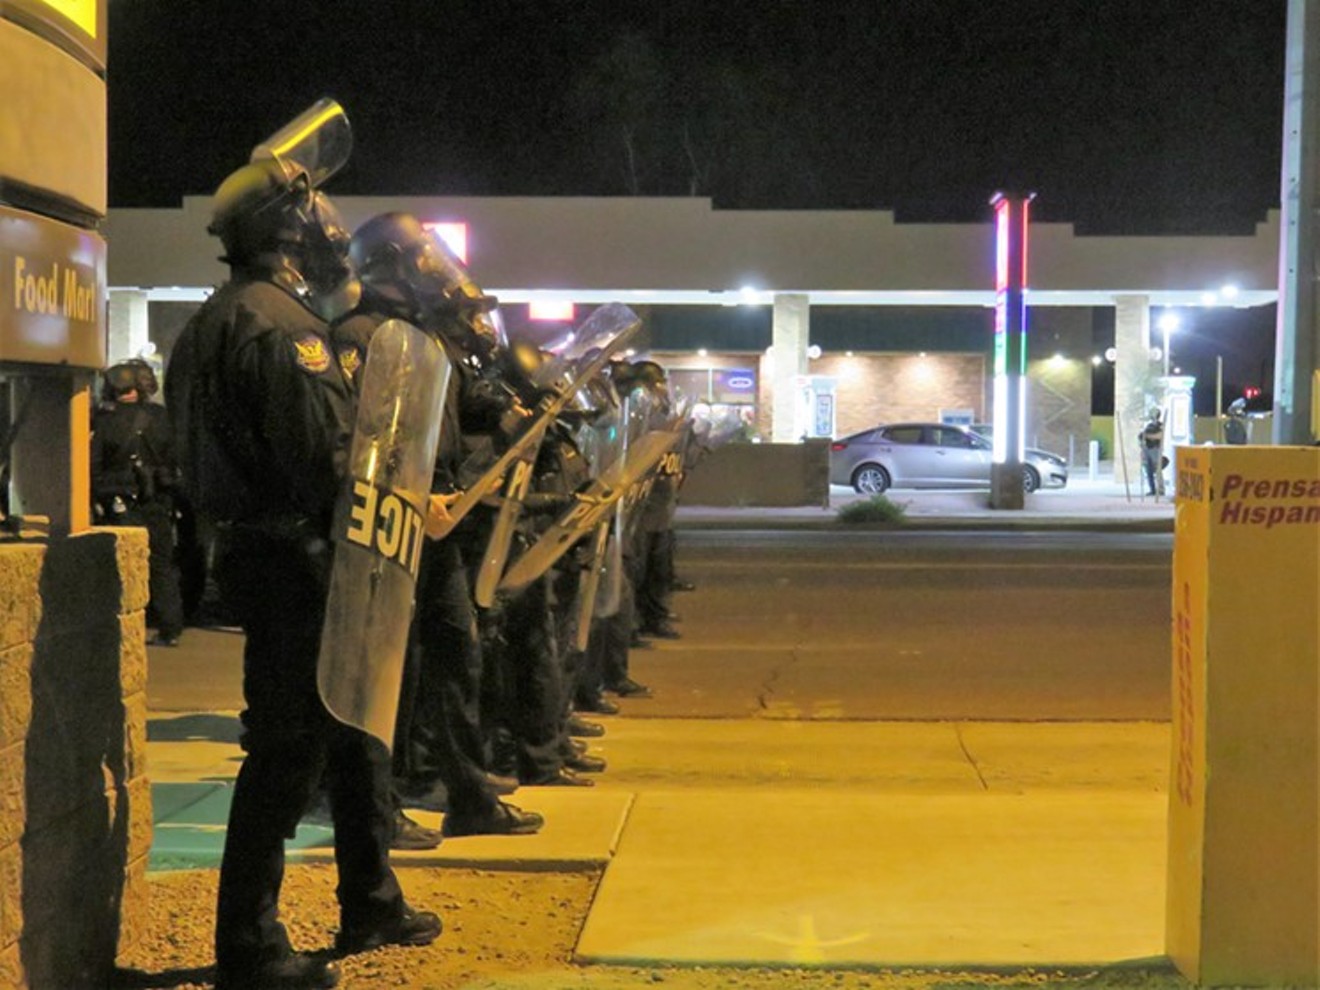 Arizona lawmakers made multiple attempts to criminalize protests this year.